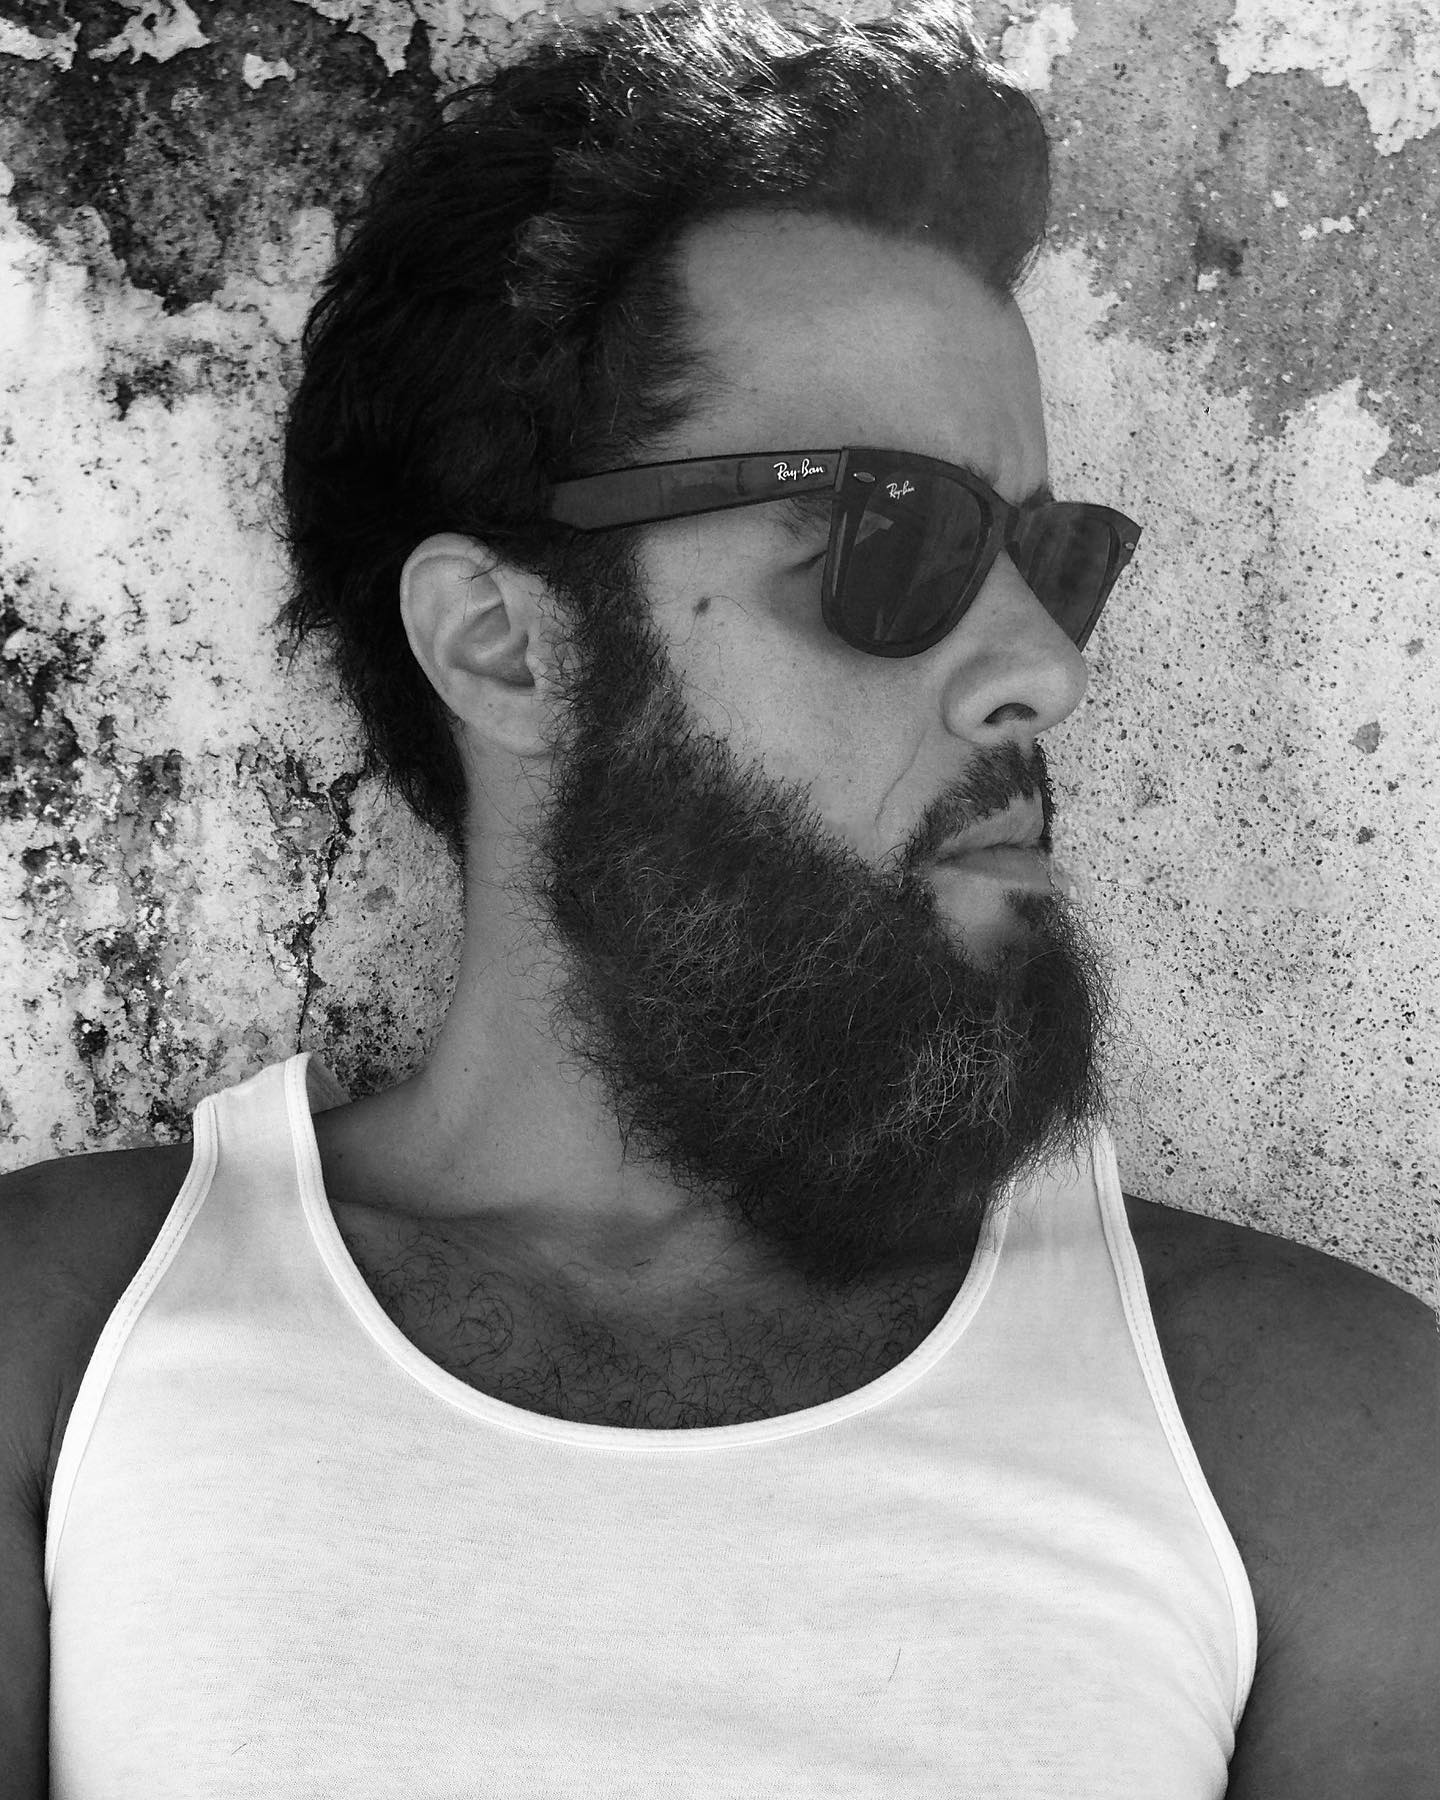 https://e.radikal.host/2023/04/22/Photo-by-Joaquim-Lopes-on-January-20-2023.-May-be-a-black-and-white-image-of-one-or-more-people-beard-eyewear-and-tanktop..jpg